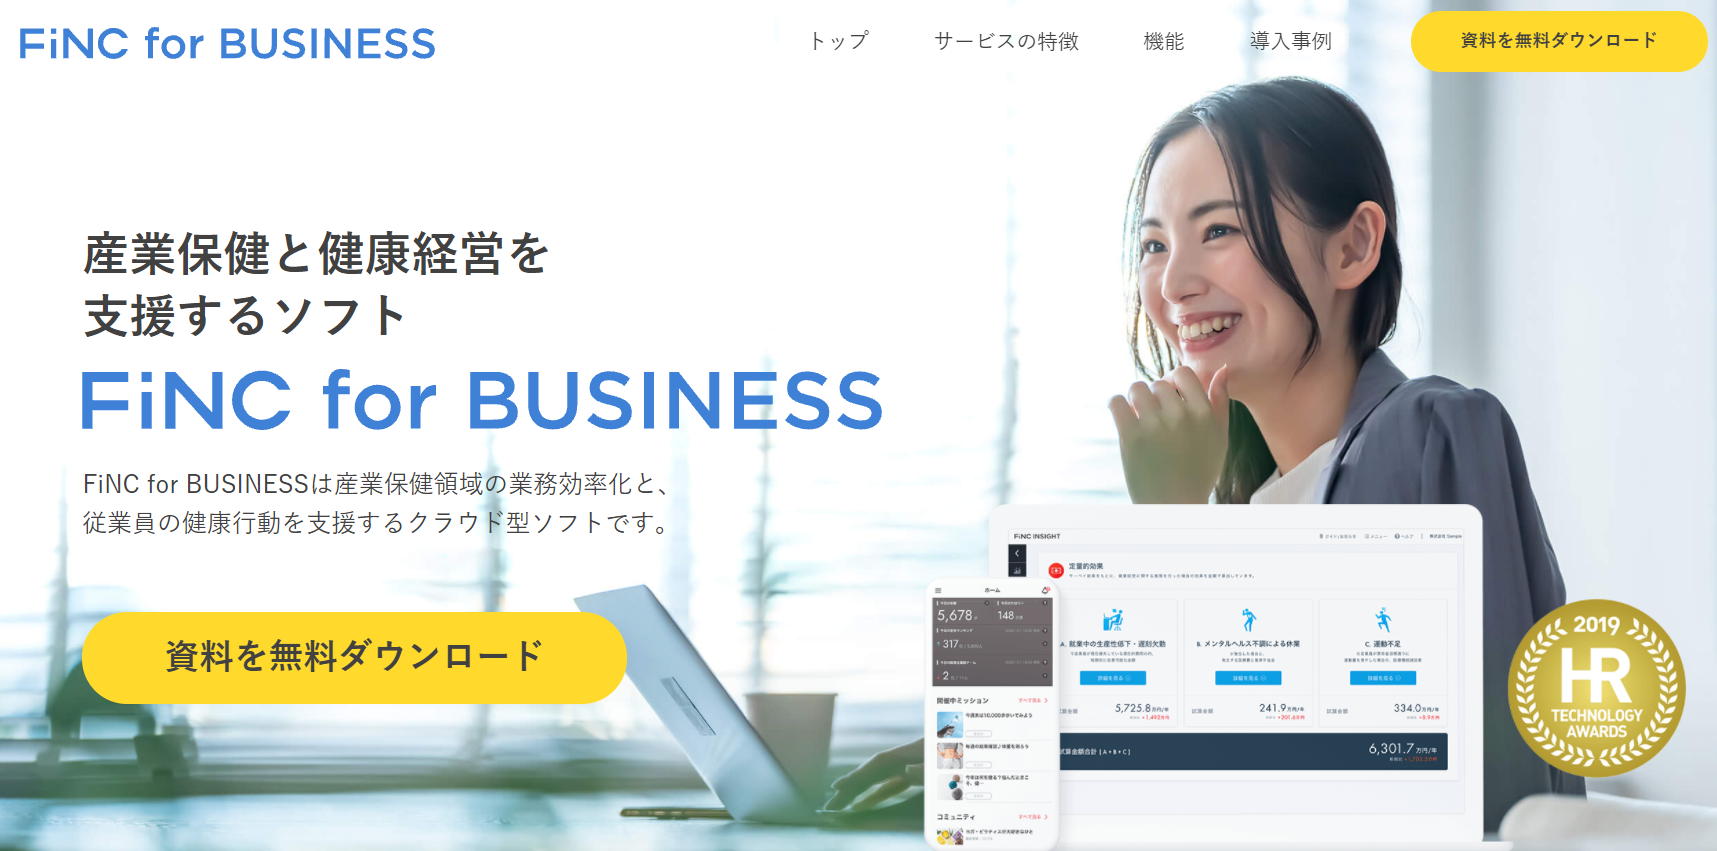 FiNC for BUSINESS